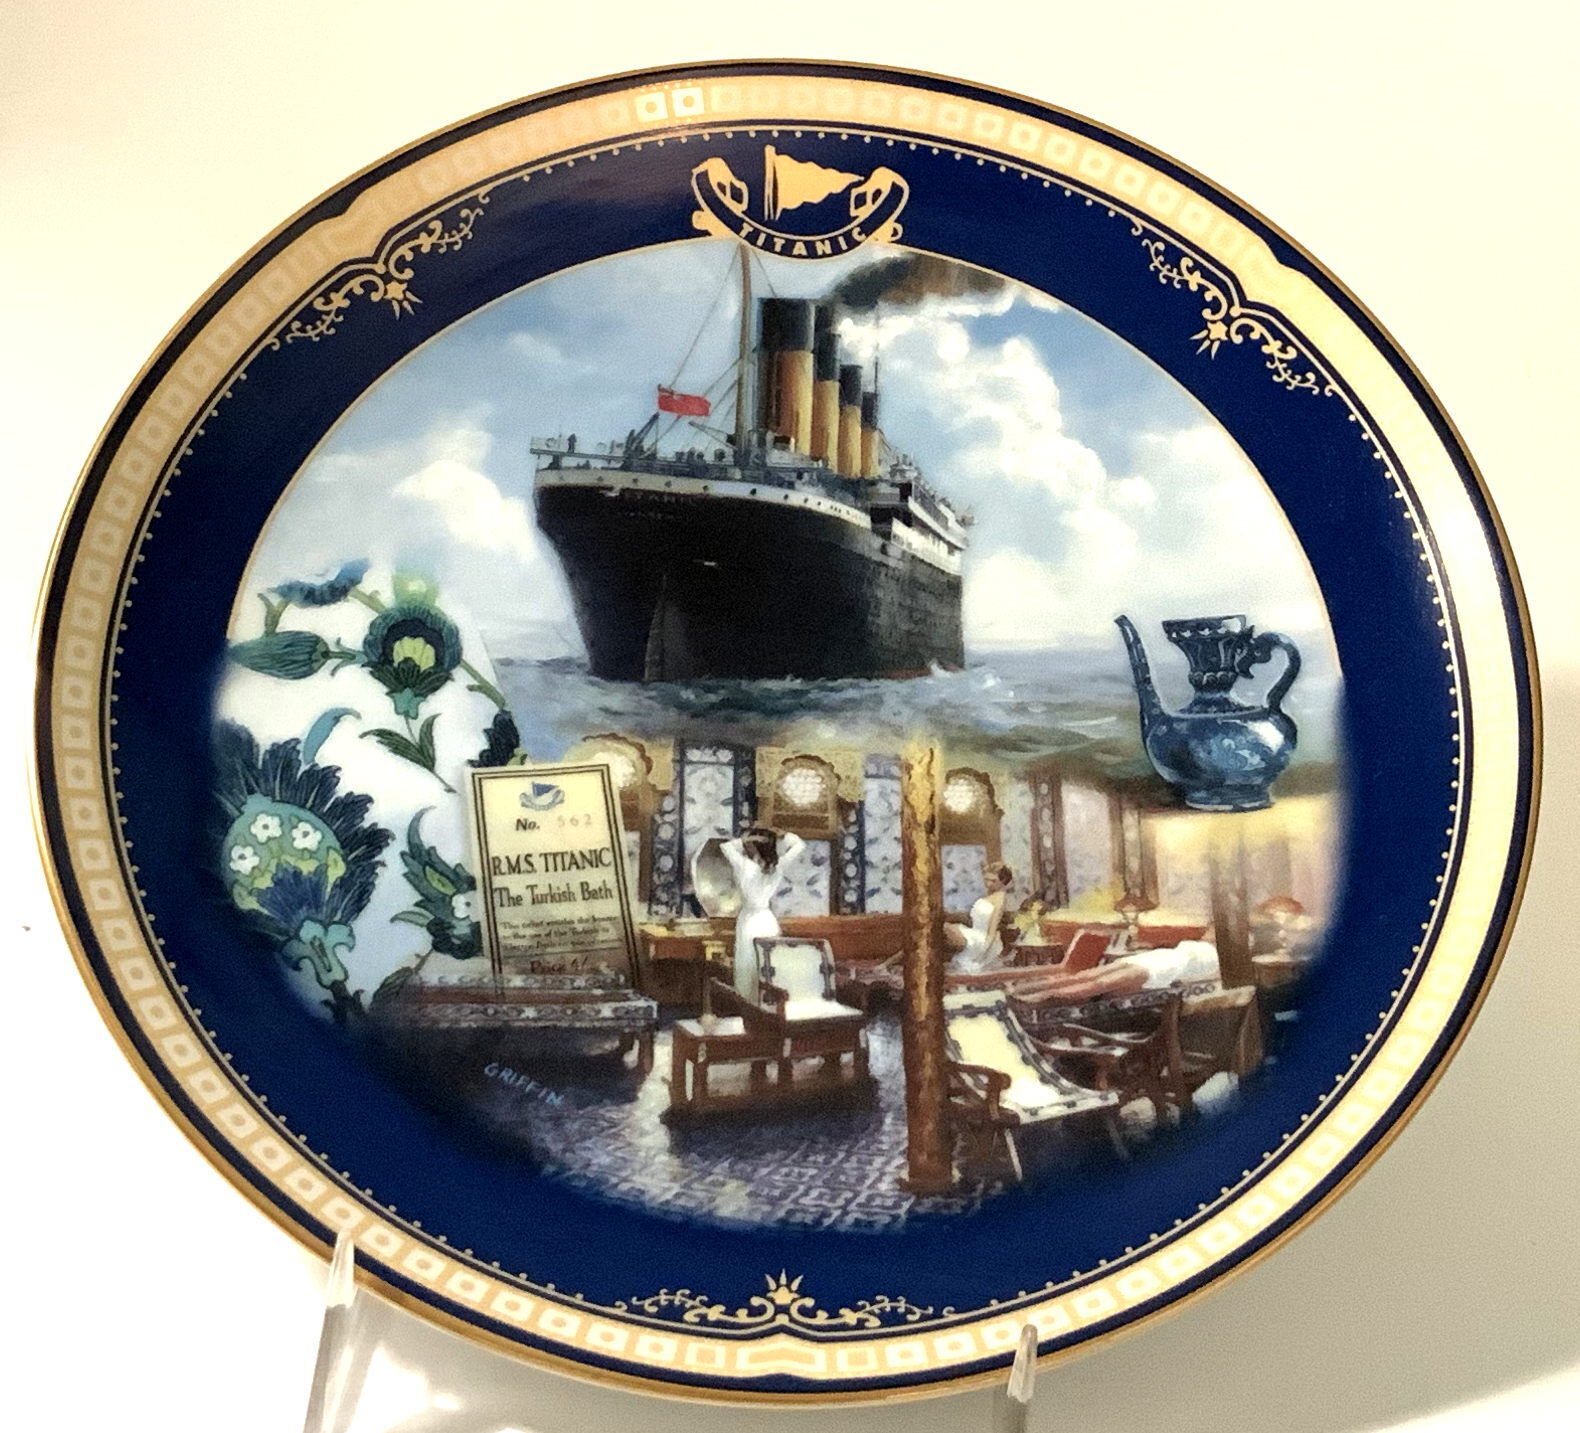 1999 RMS Titanic Collector Plate - Queen of the Ocean Series - THE TURKISH BATH